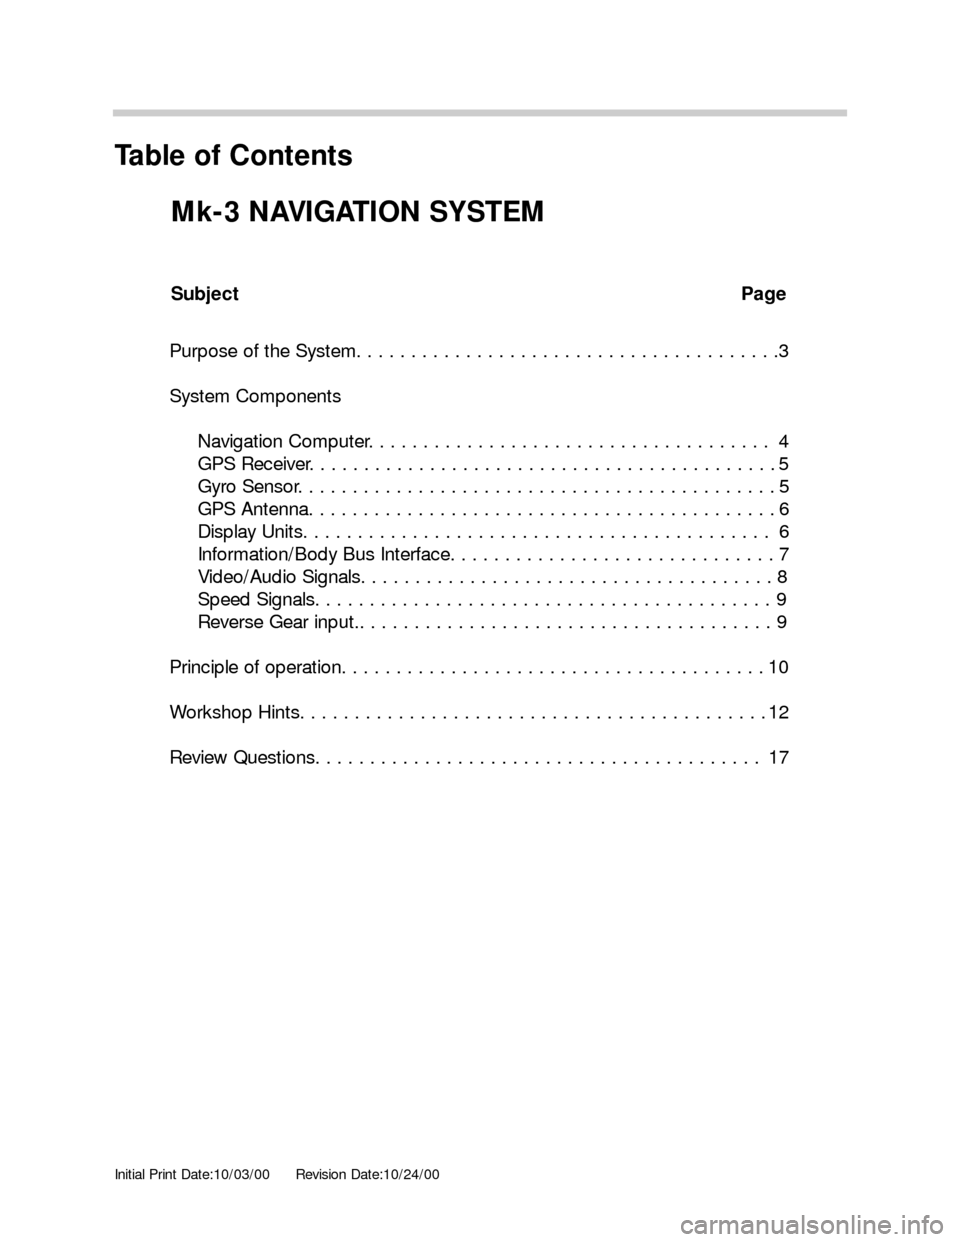 BMW 3 SERIES 2005 E46 Mk3 Navigation System Manual Initial Print Date:10/03/00Revision Date:10/24/00
Subject Page
Purpose of the System. . . . . . . . . . . . . . . . . . . . . . . . . . . . . . . . . . . . . . .3
System Components
Navigation Computer